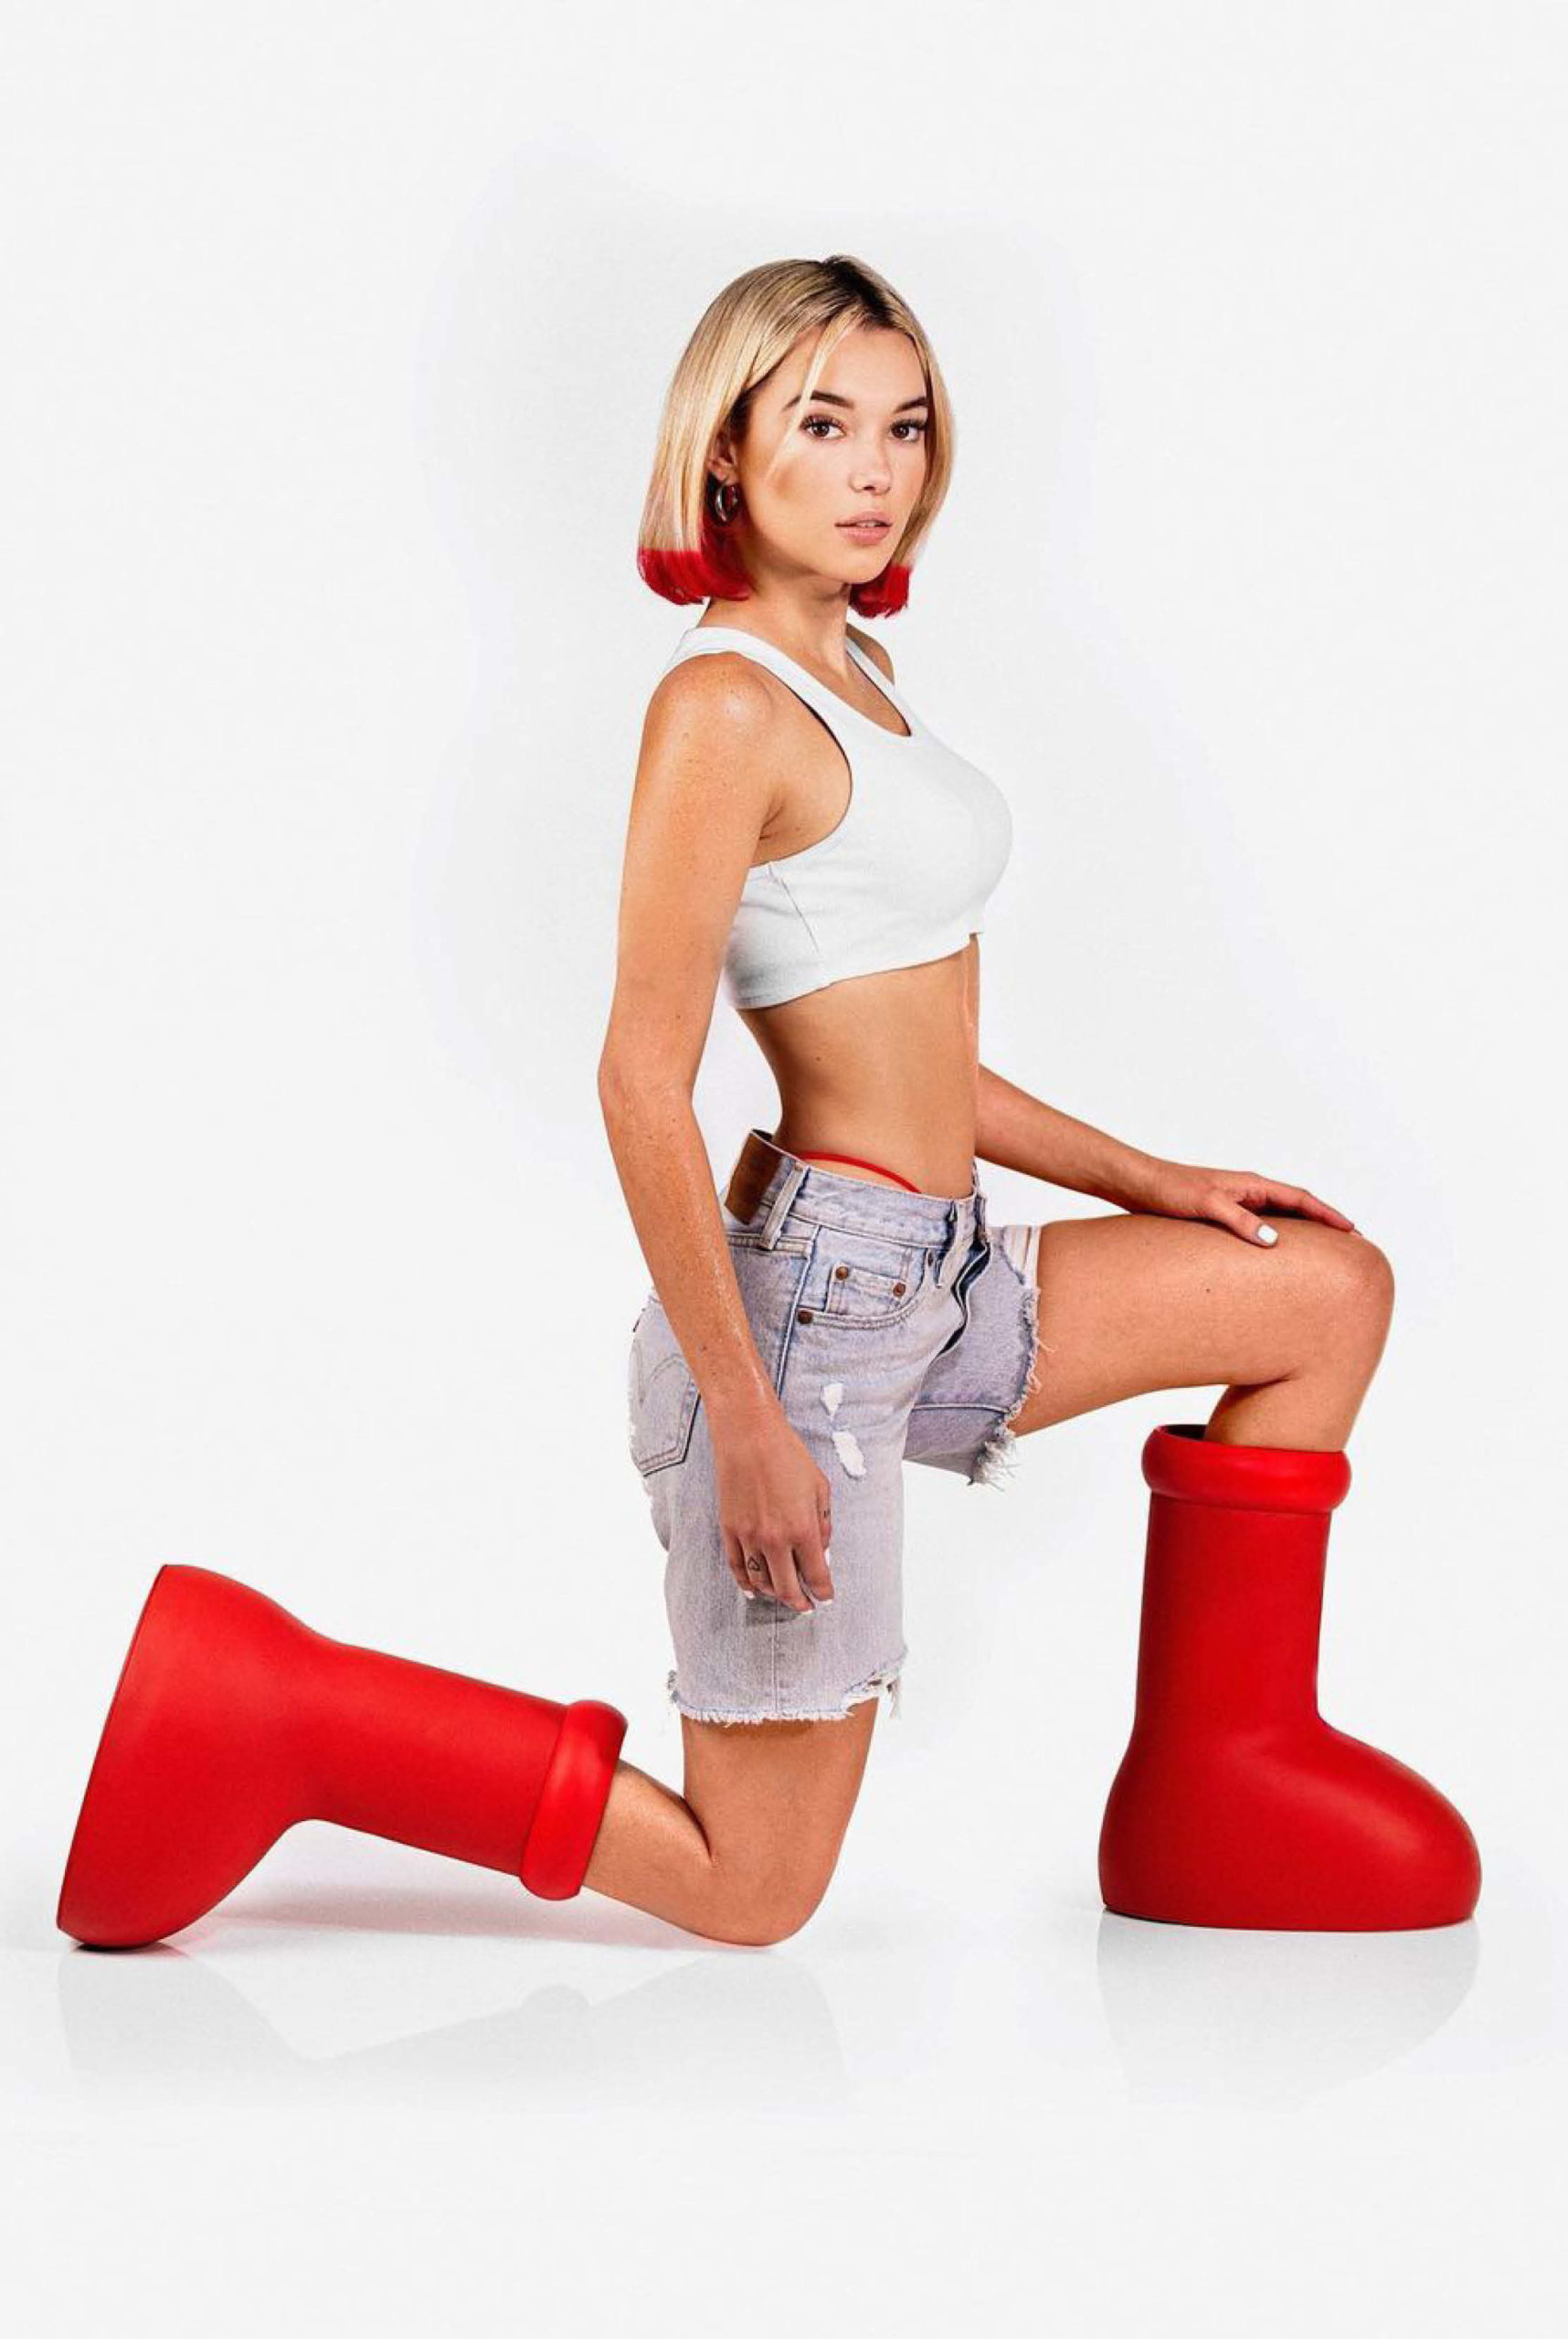 Hey, Quick Question: Why Do People Have Such Strong Feelings About Those  Big Red Boots? - Fashionista